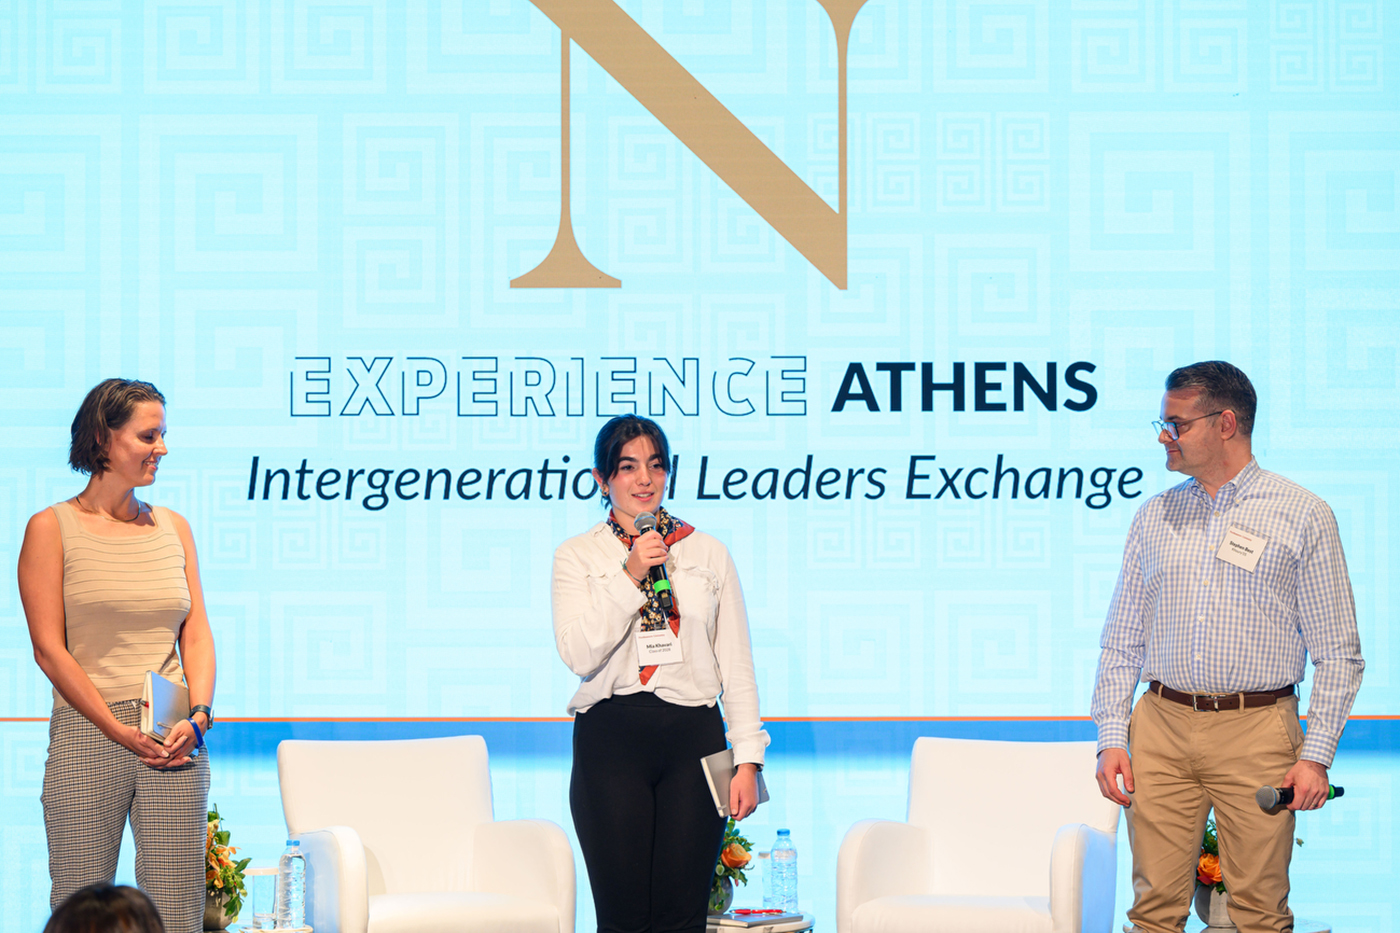 Speakers on stage at the “Experience Athens: Intergenerational Leaders Exchange" event.